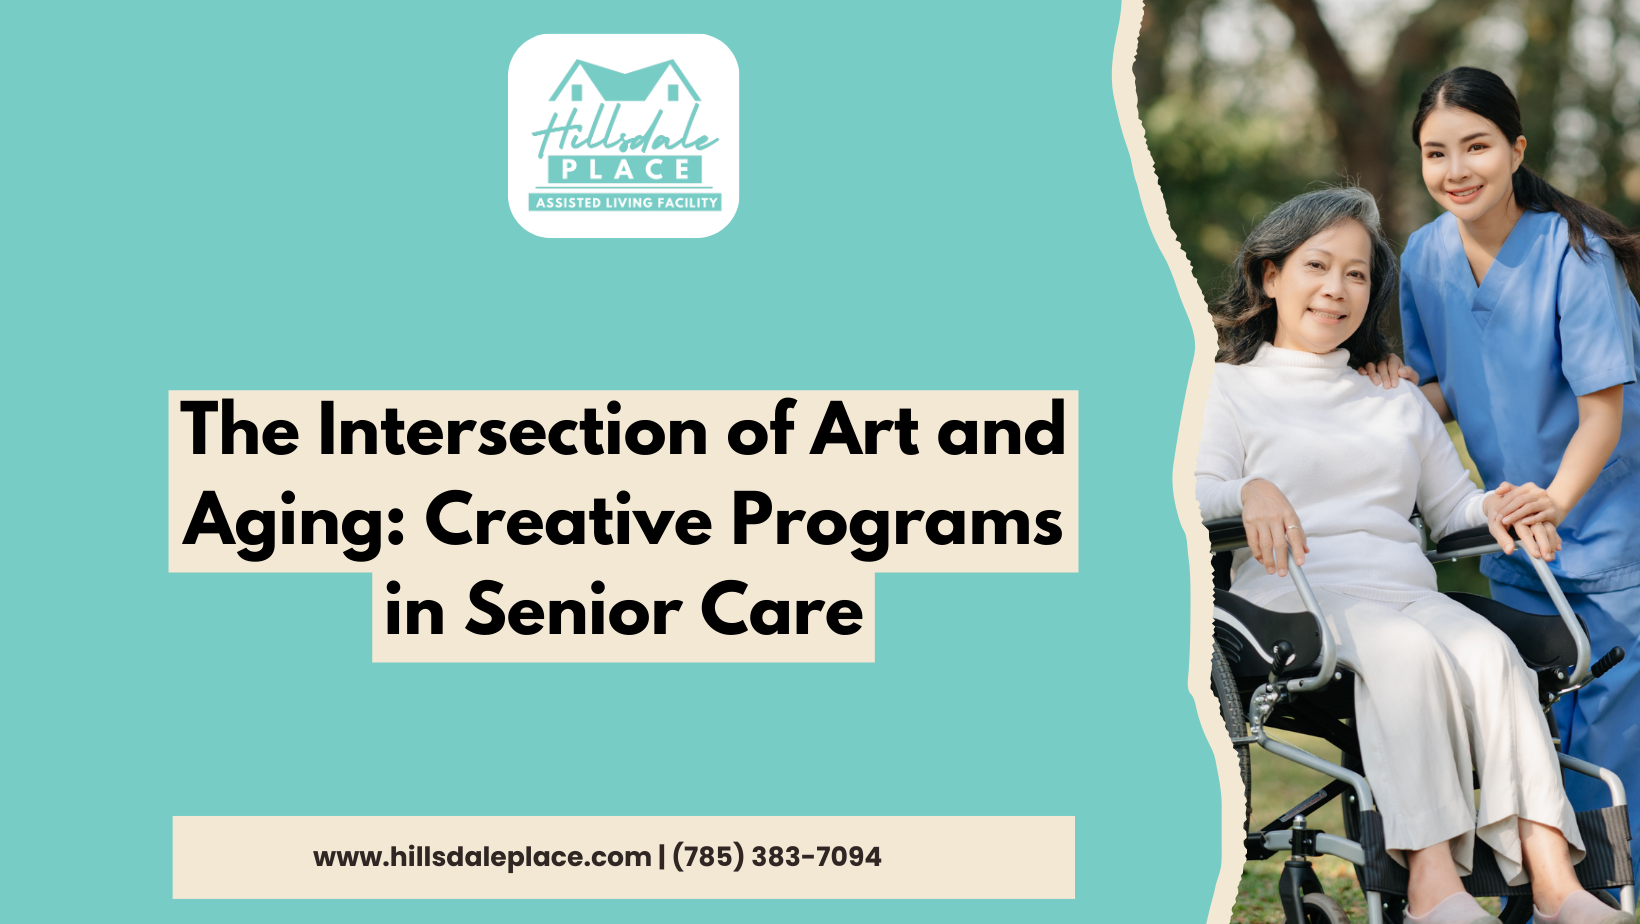 The Intersection of Art and Aging: Creative Programs in Senior Care